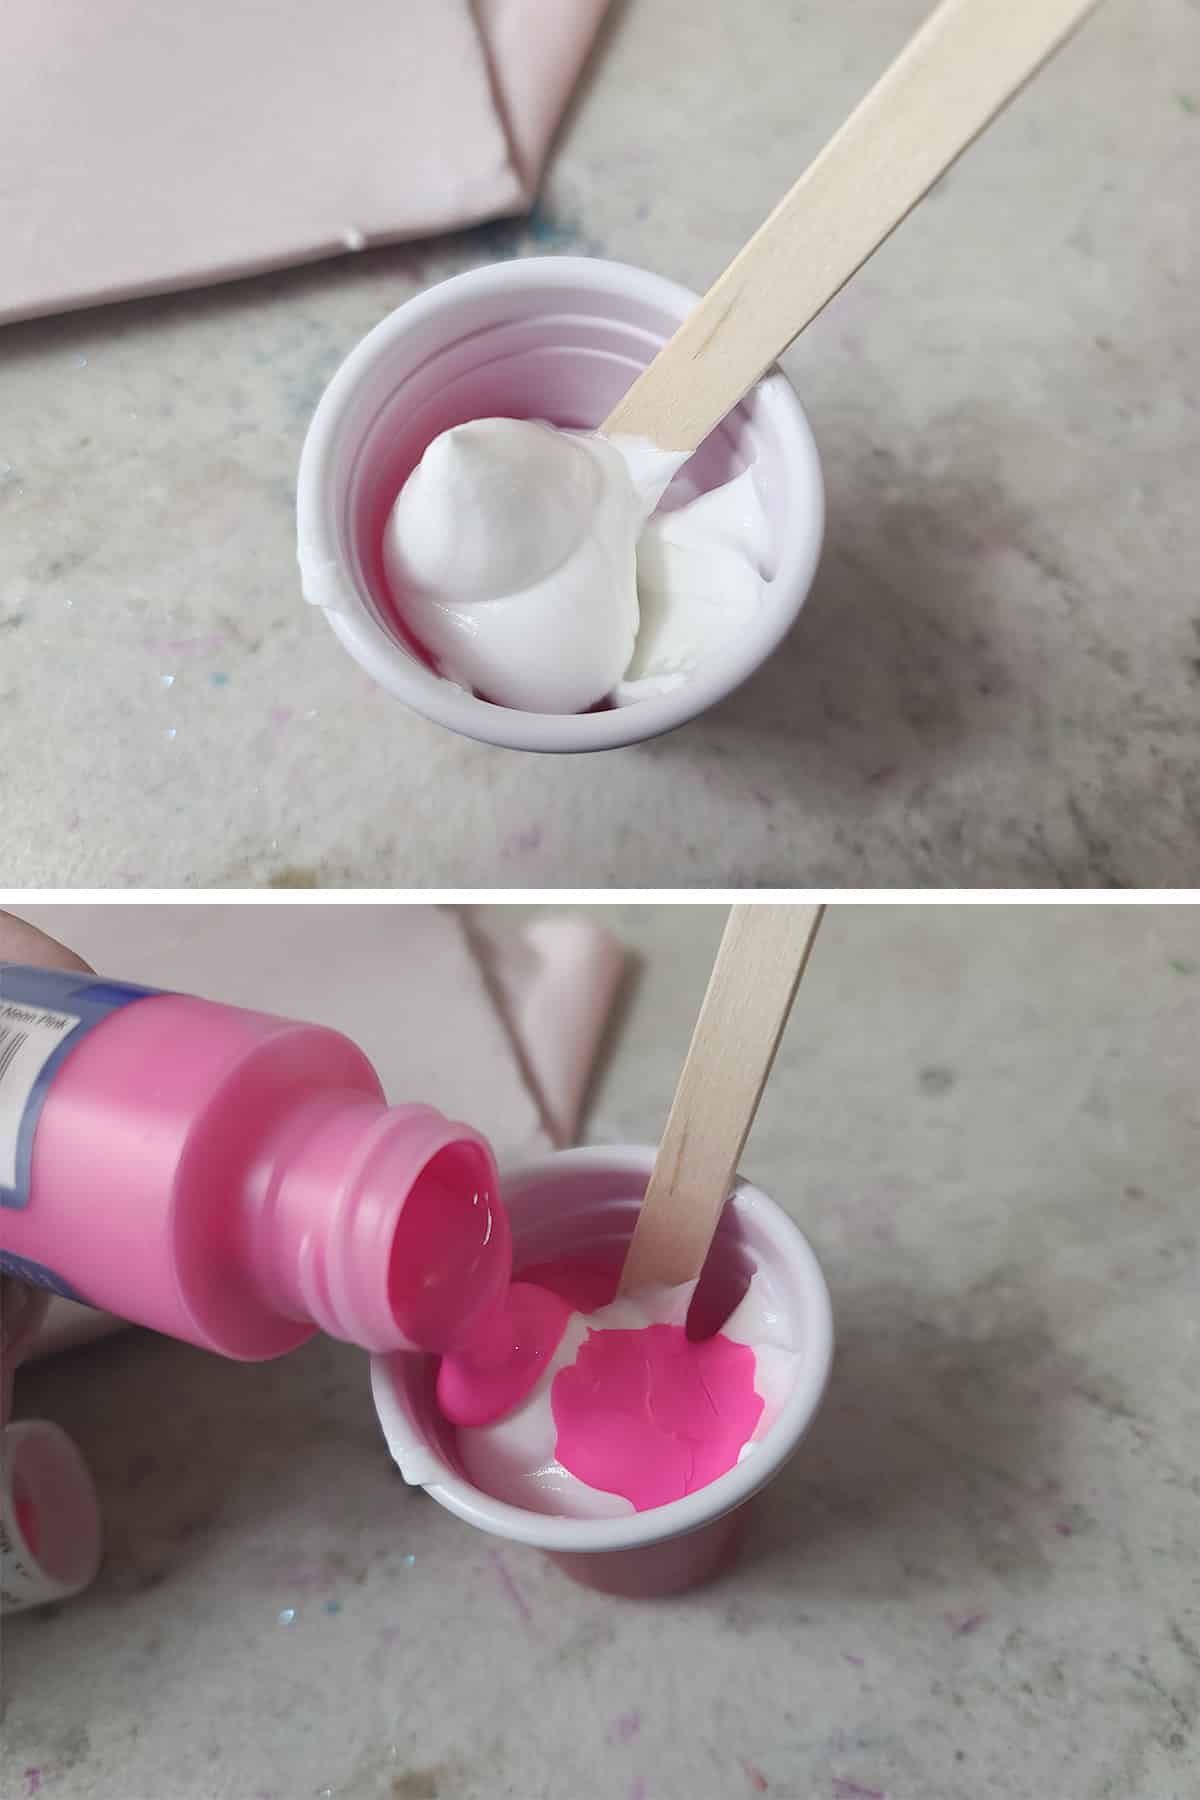 A two part compilation image showing neon pink acrylic paint being added to a small cup of caulking.